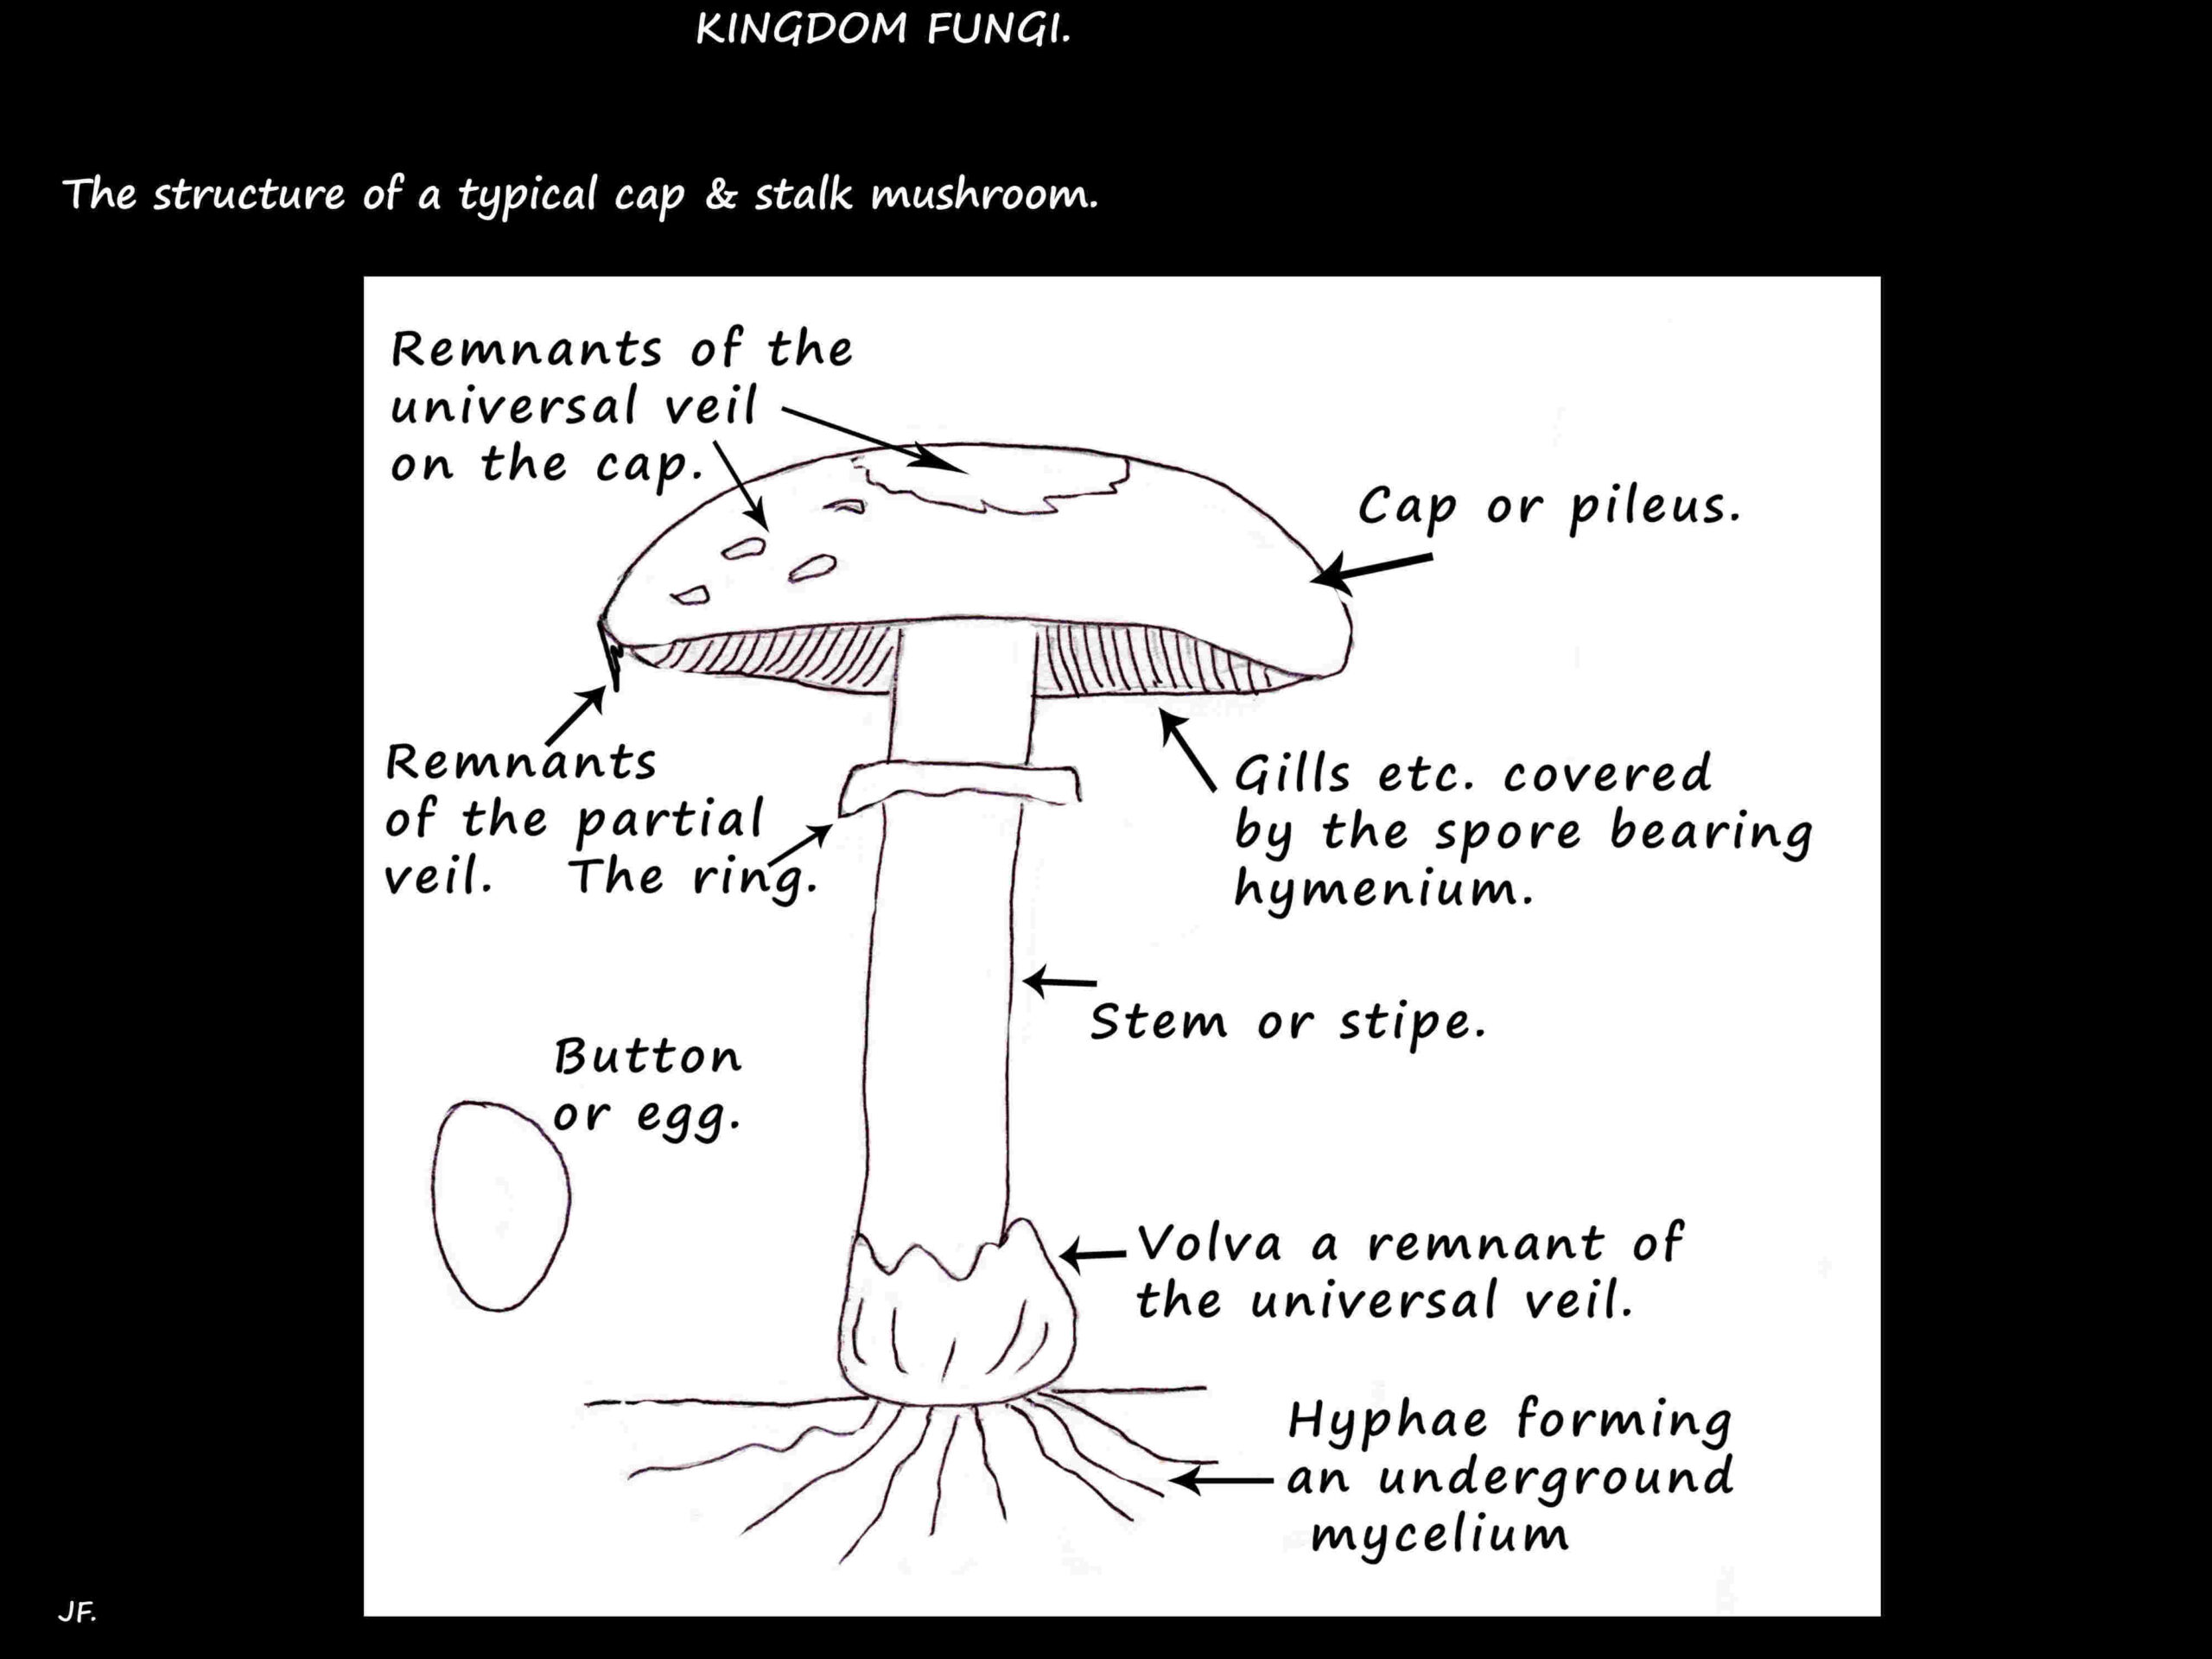 5 The structure of a typical mushroom